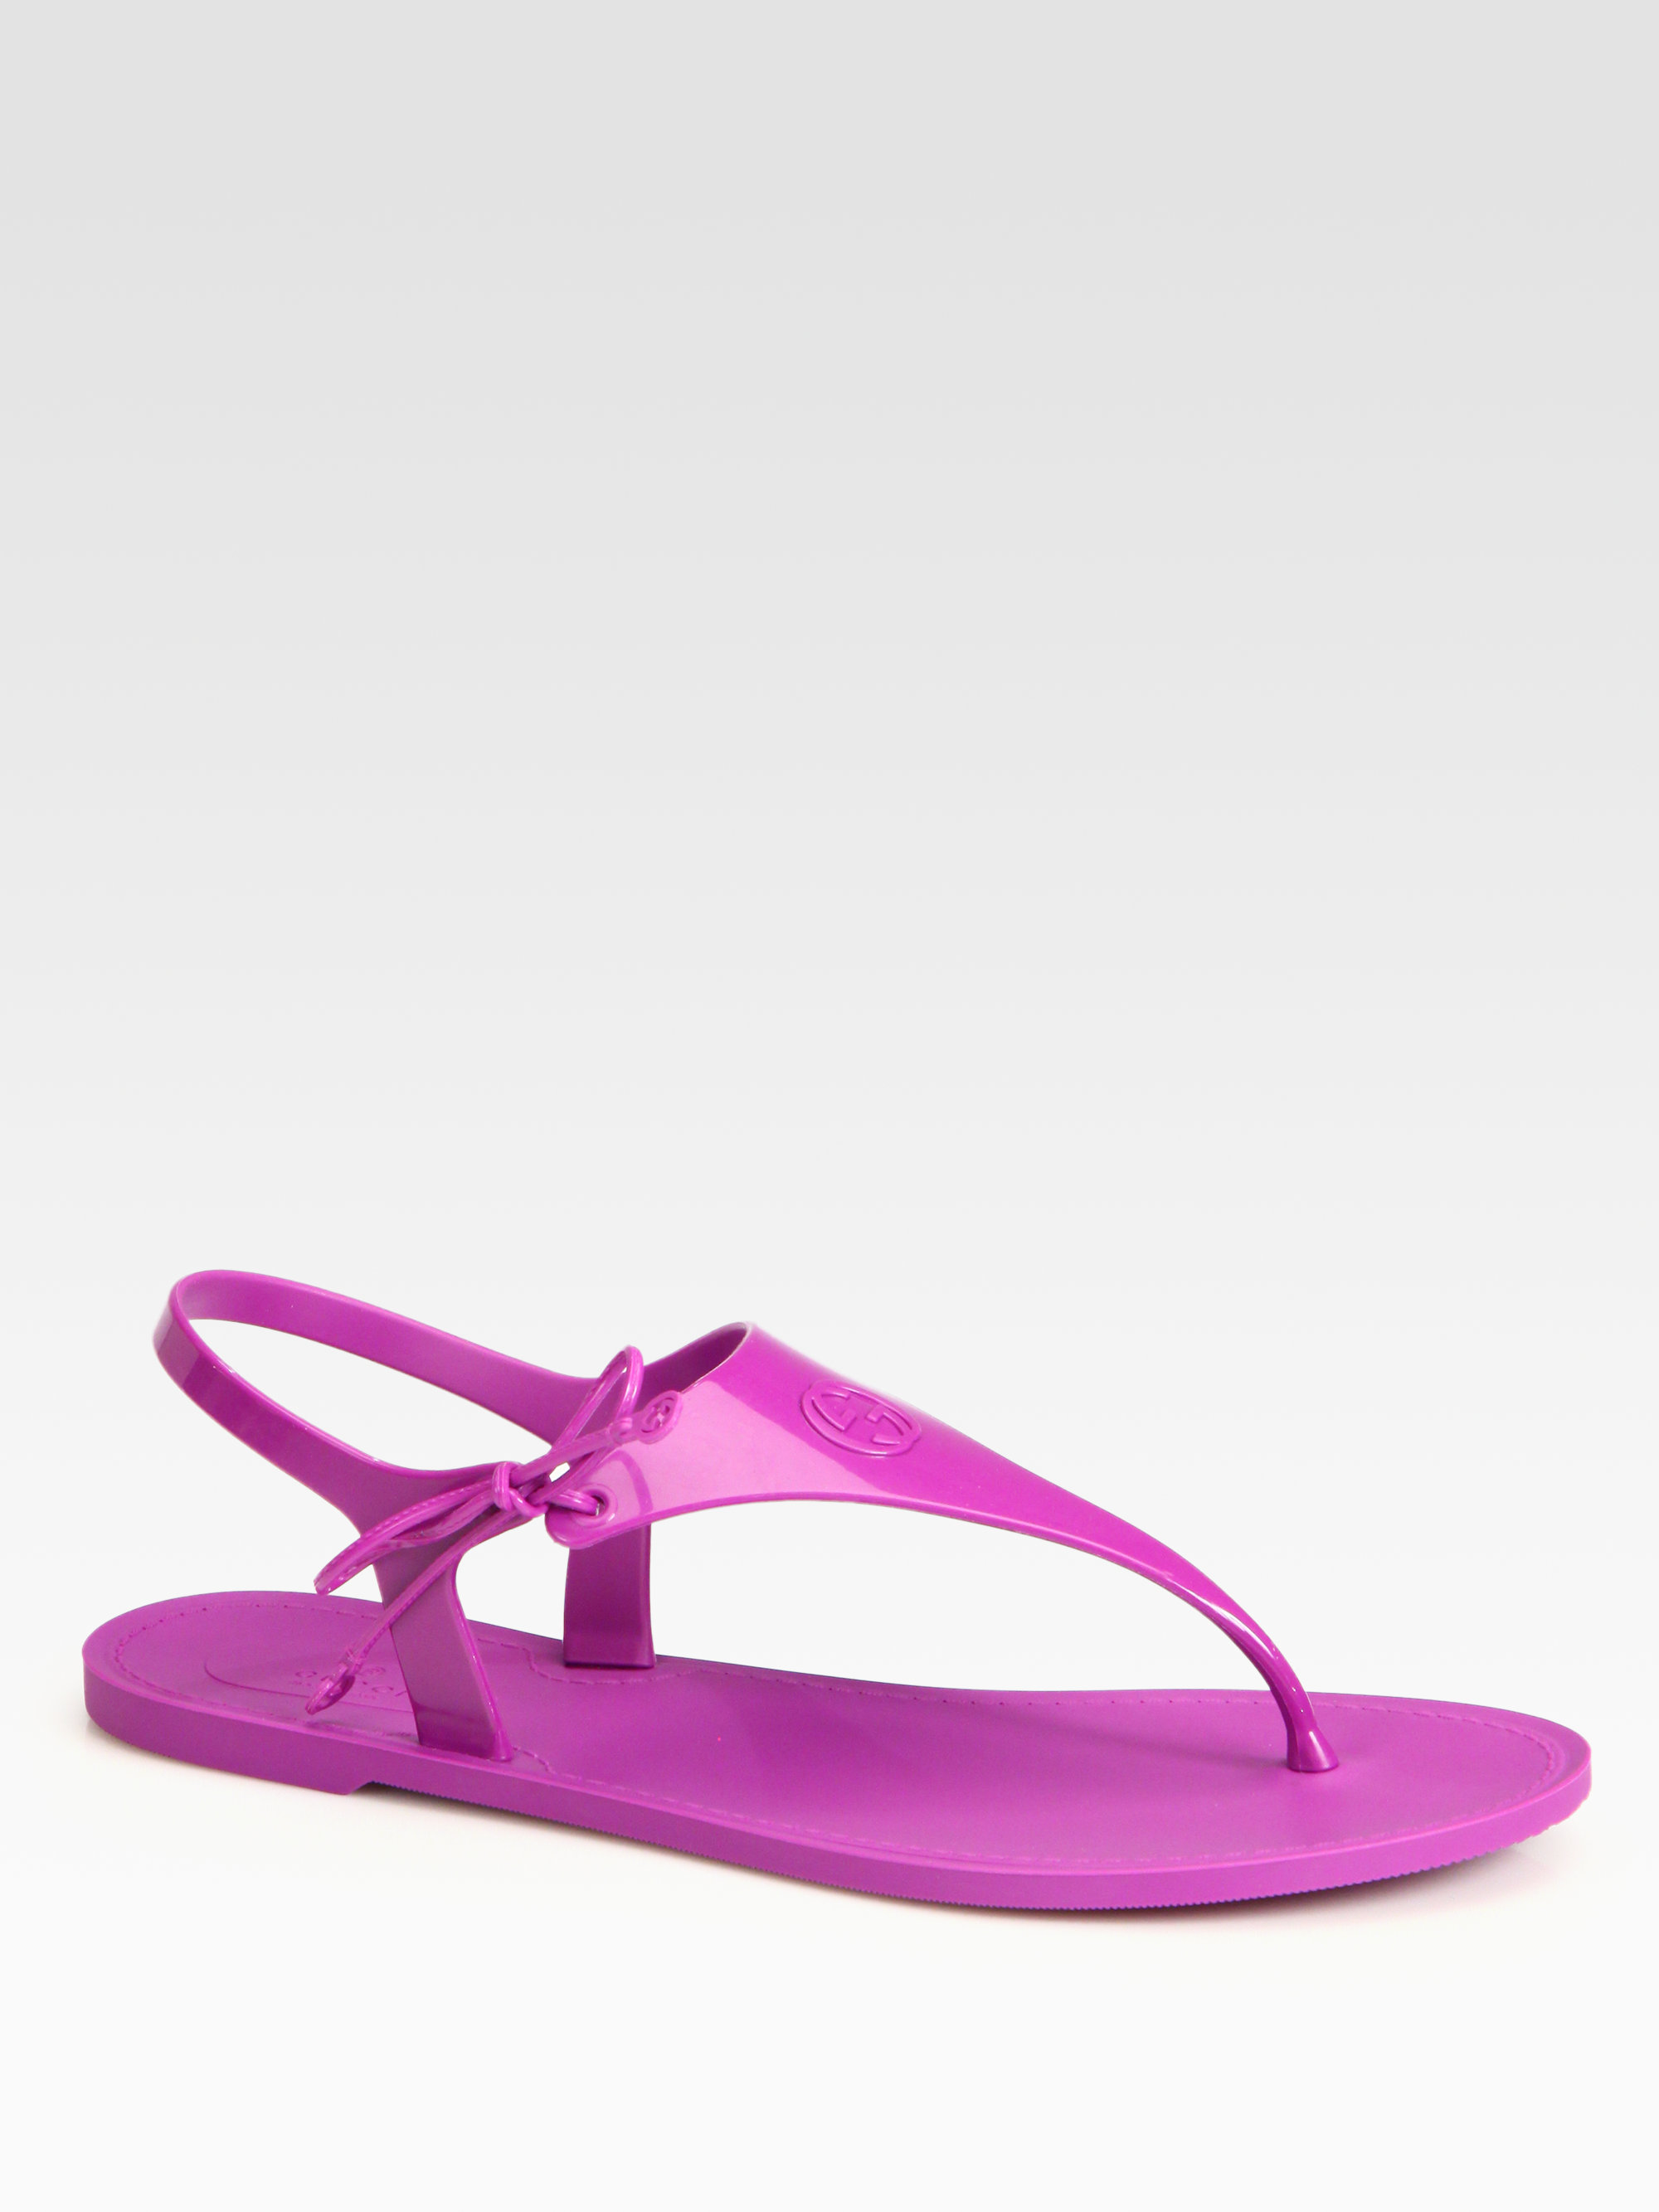 gucci rubber thong sandals